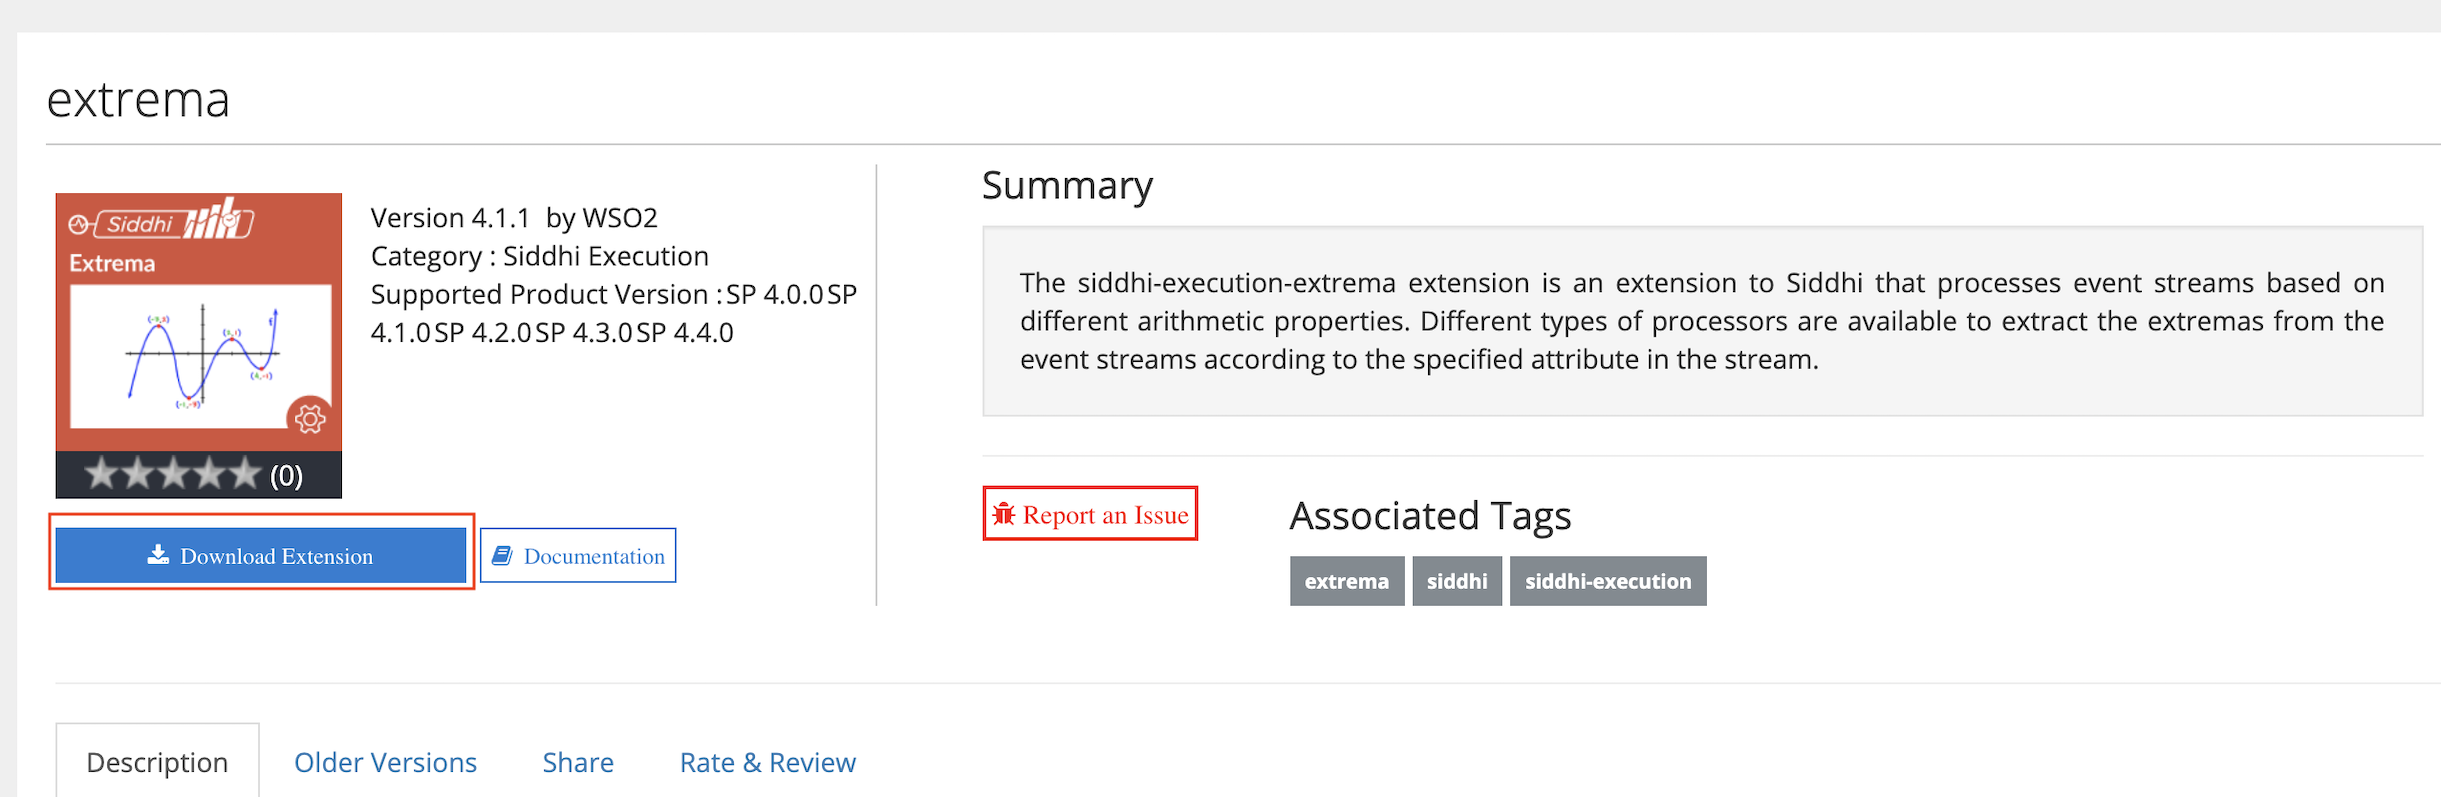 Extrema Extension Page